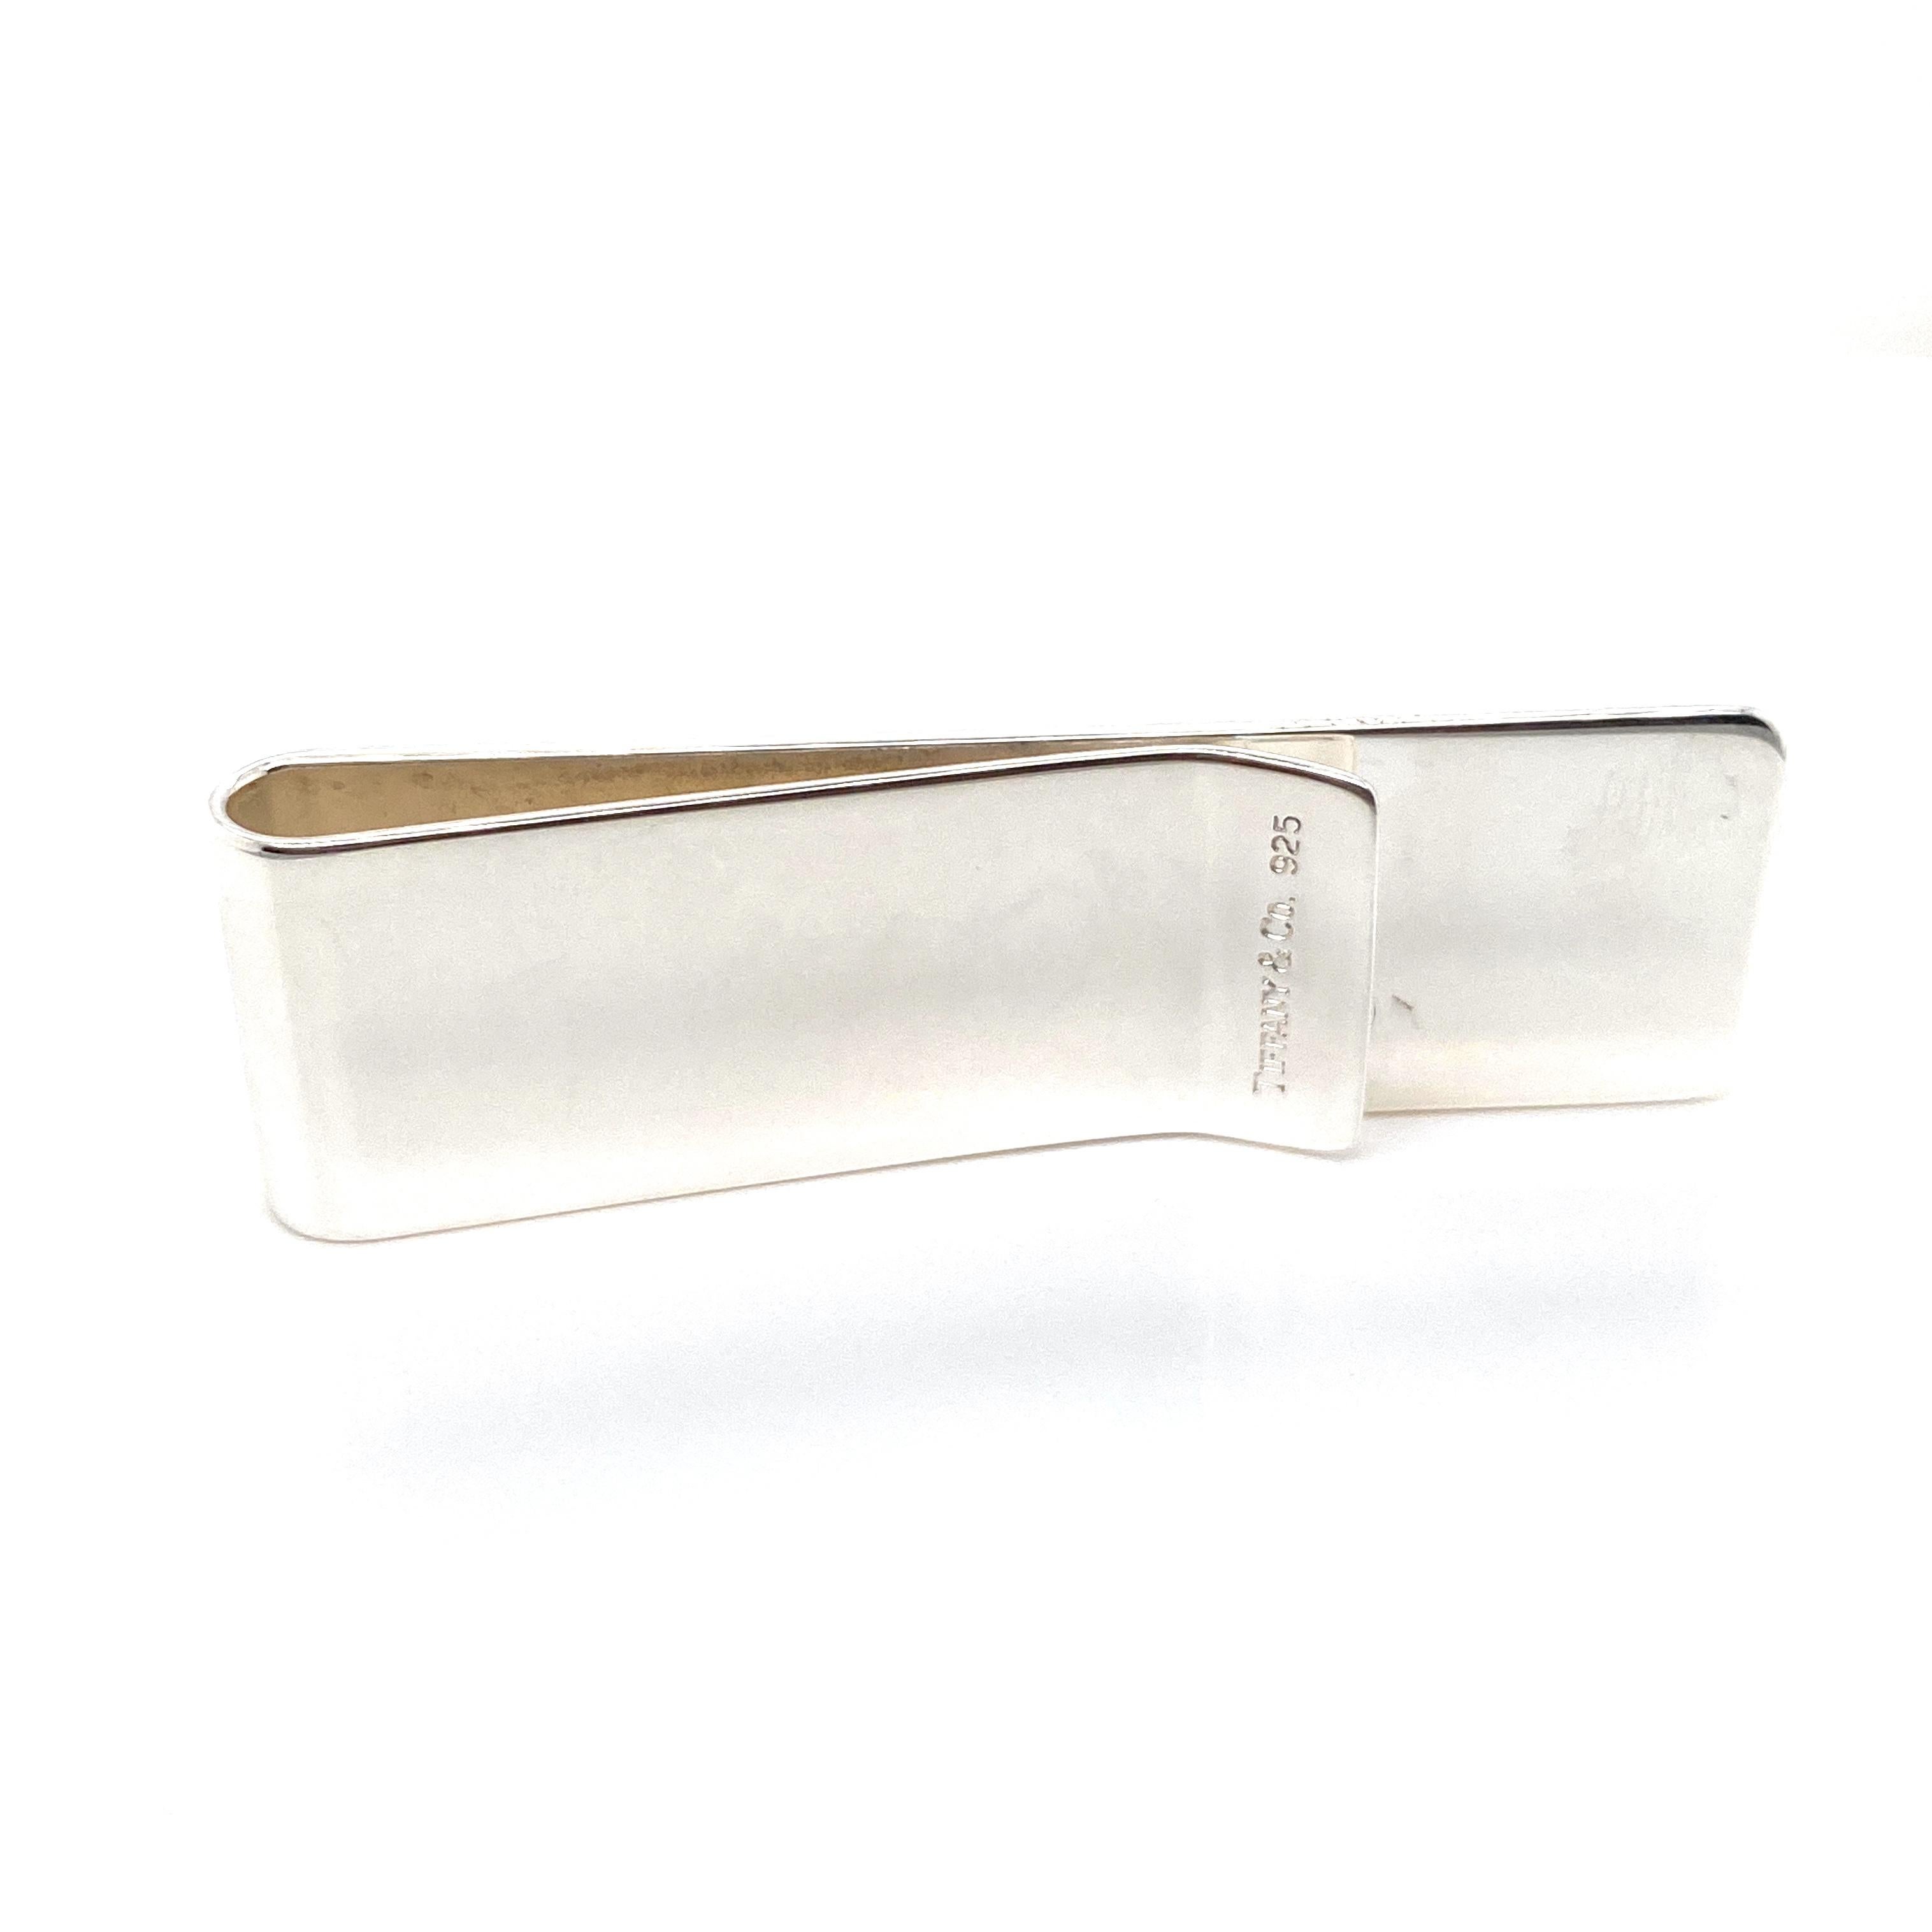 Crafted with an original symbol from the renowned Tiffany hollowware shop, the Tiffany 1837 Makers collection honors Tiffany's legacy of expert craftsmanship through a modern lens. This streamlined take on a classic money clip is the perfect size to